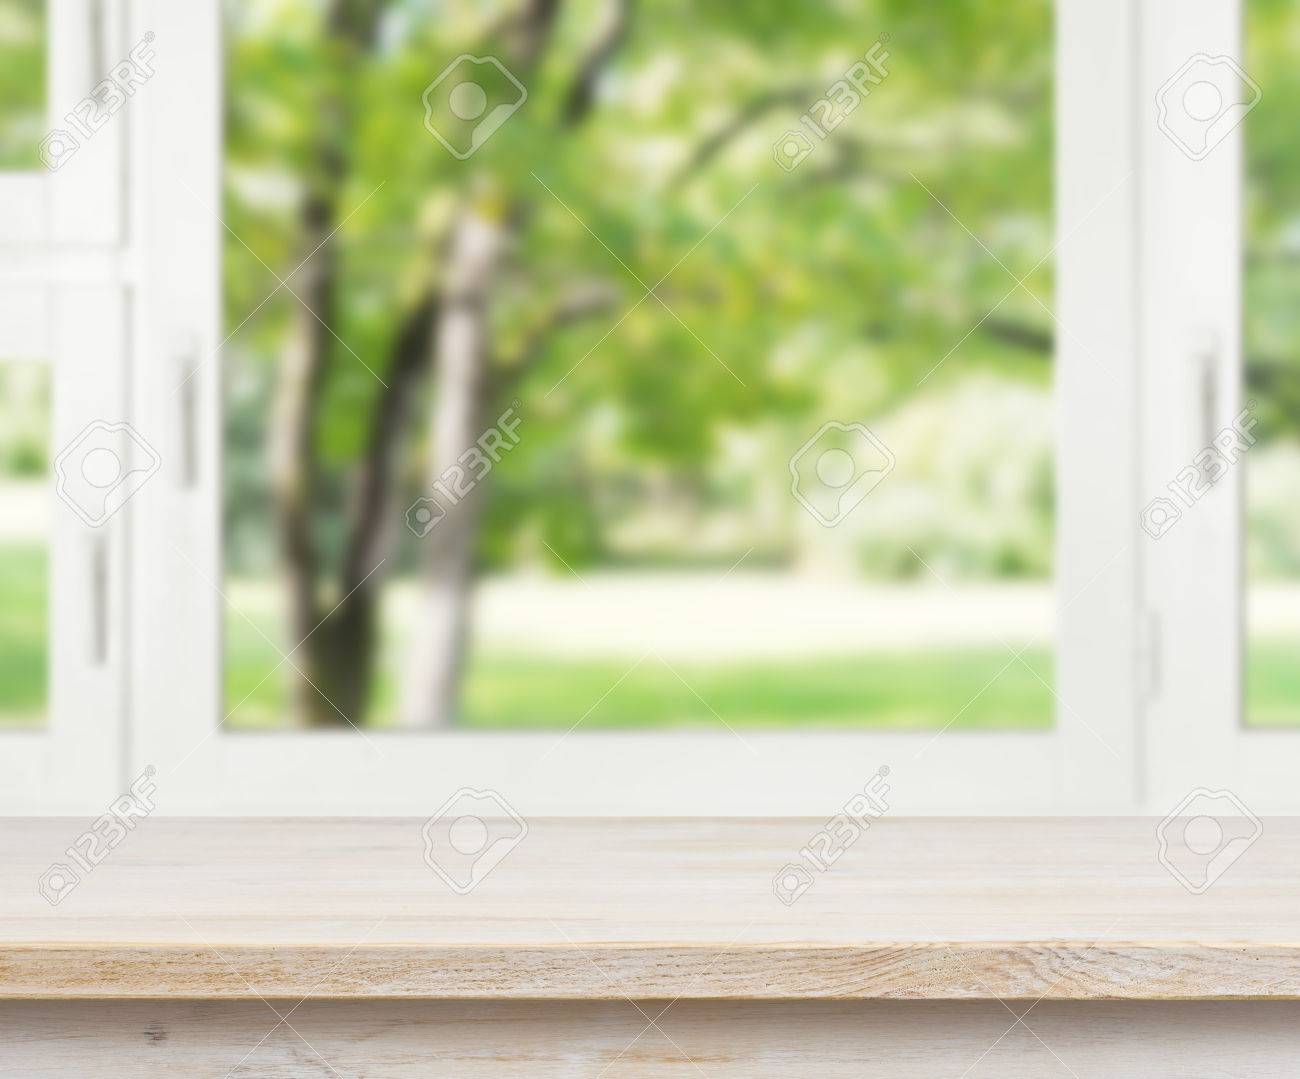 Wooden Table Over Summer Window Background Stock Photo Picture